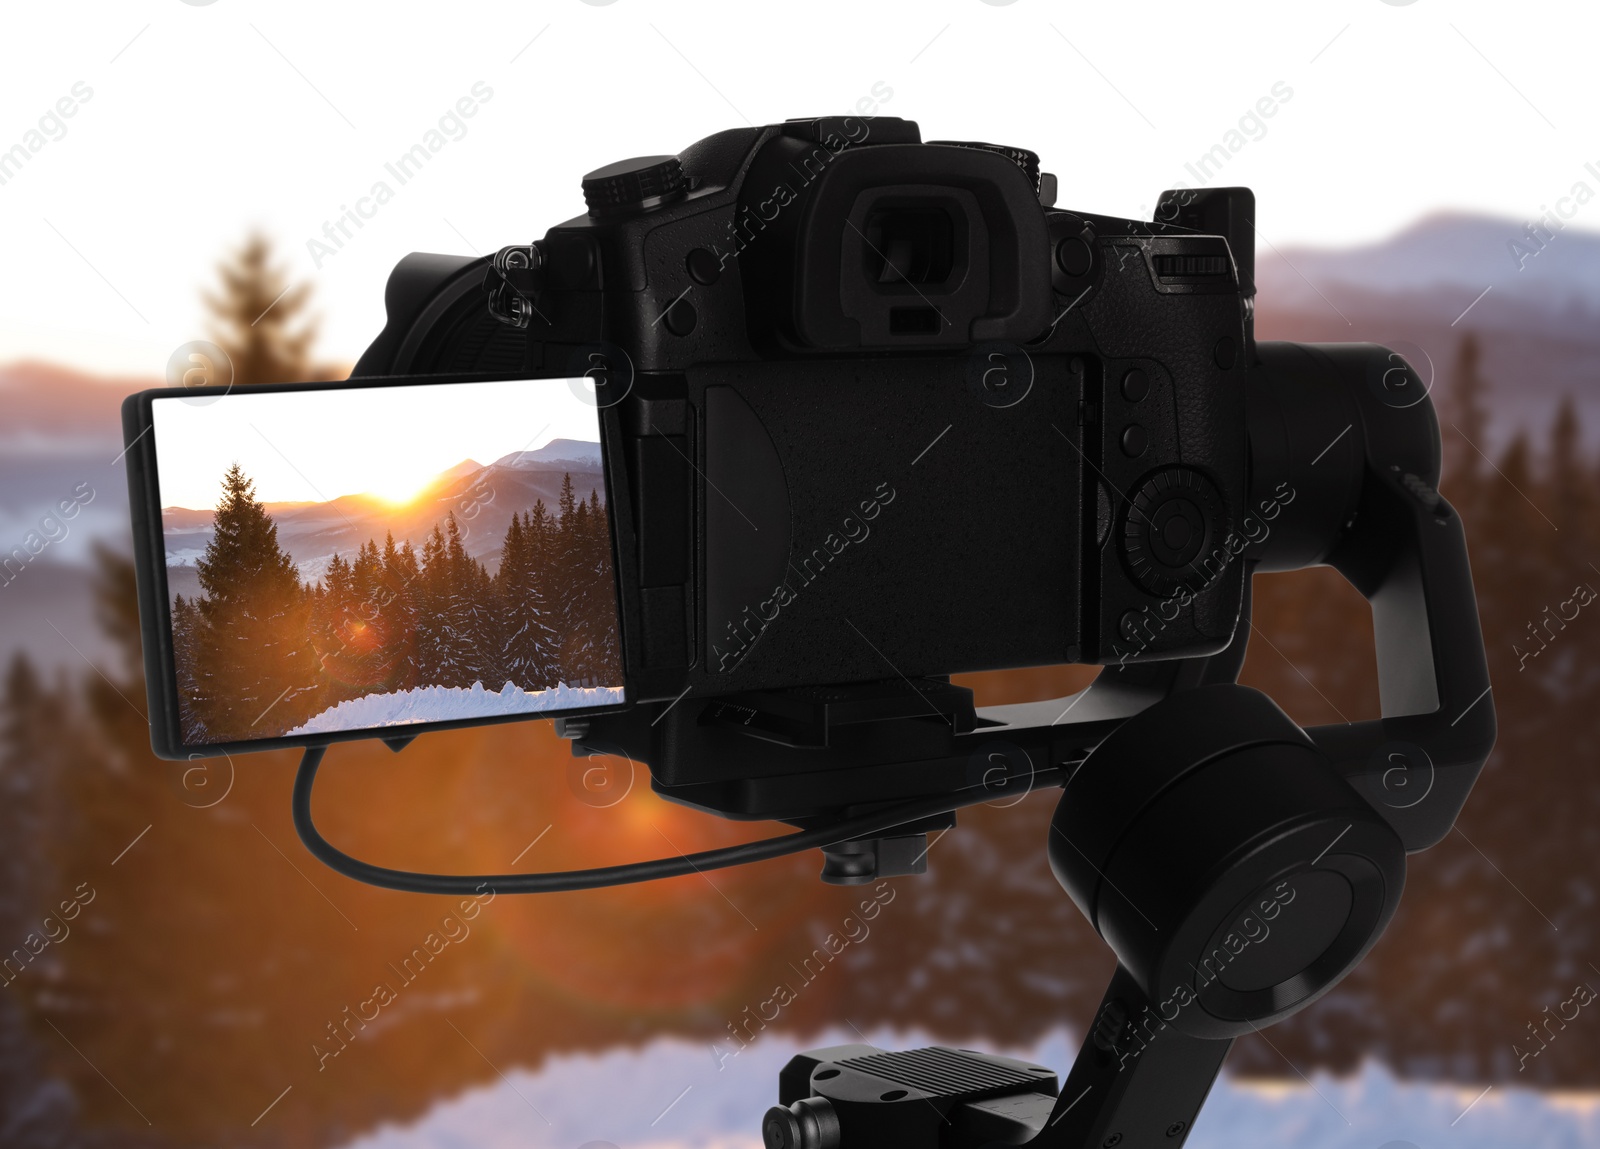 Image of Recording beautiful view of snowy forest on professional video camera